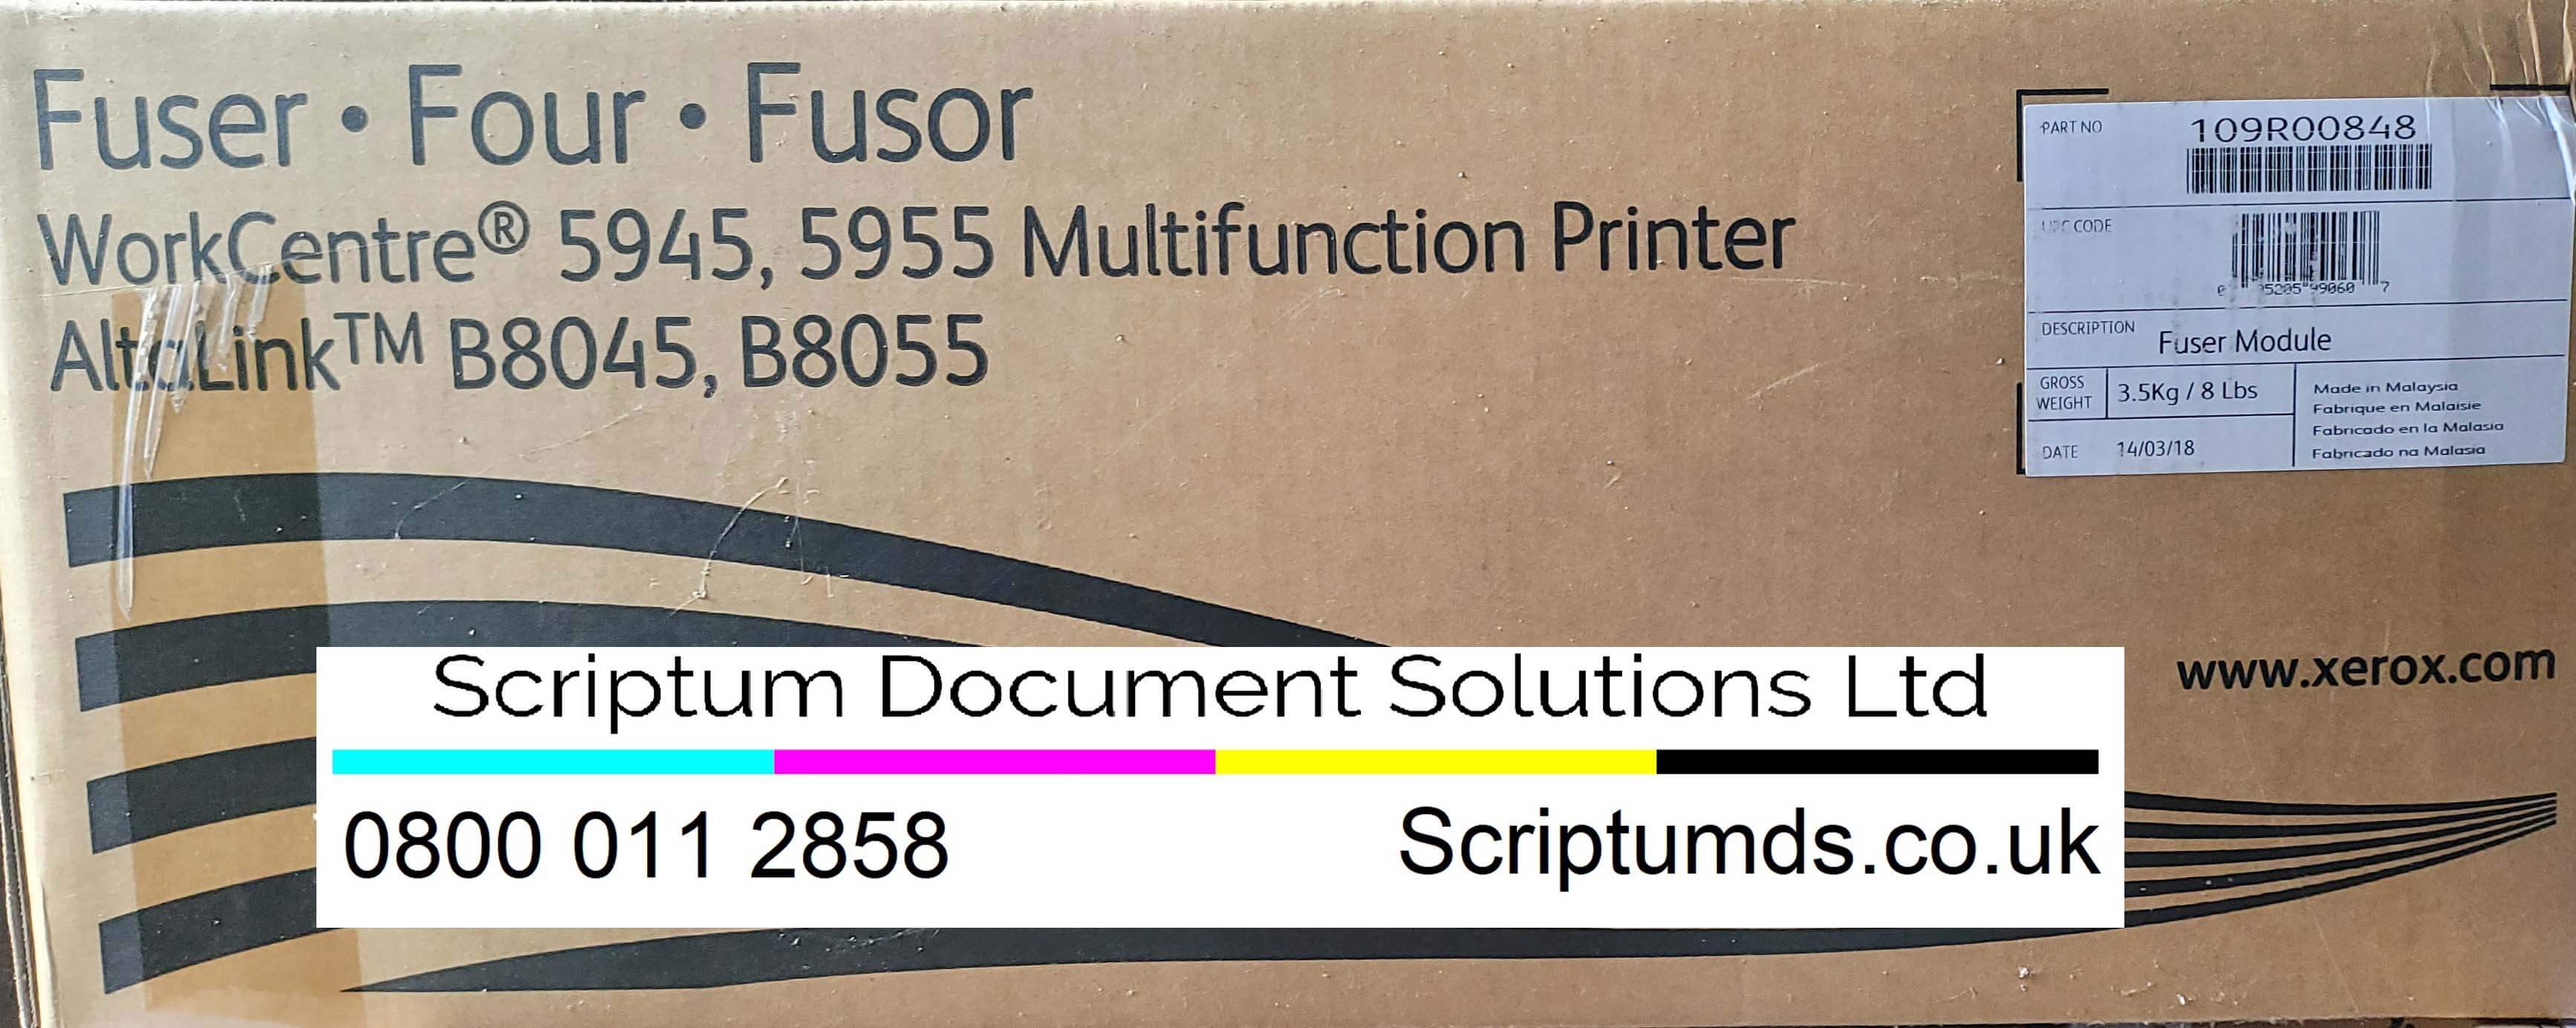 Xerox Fuser Unit (300,000 Pages) 109R00848 for WorkCentre 5945/5955/5945i/5955i AltaLink B8055 B8065 B8075 B8090